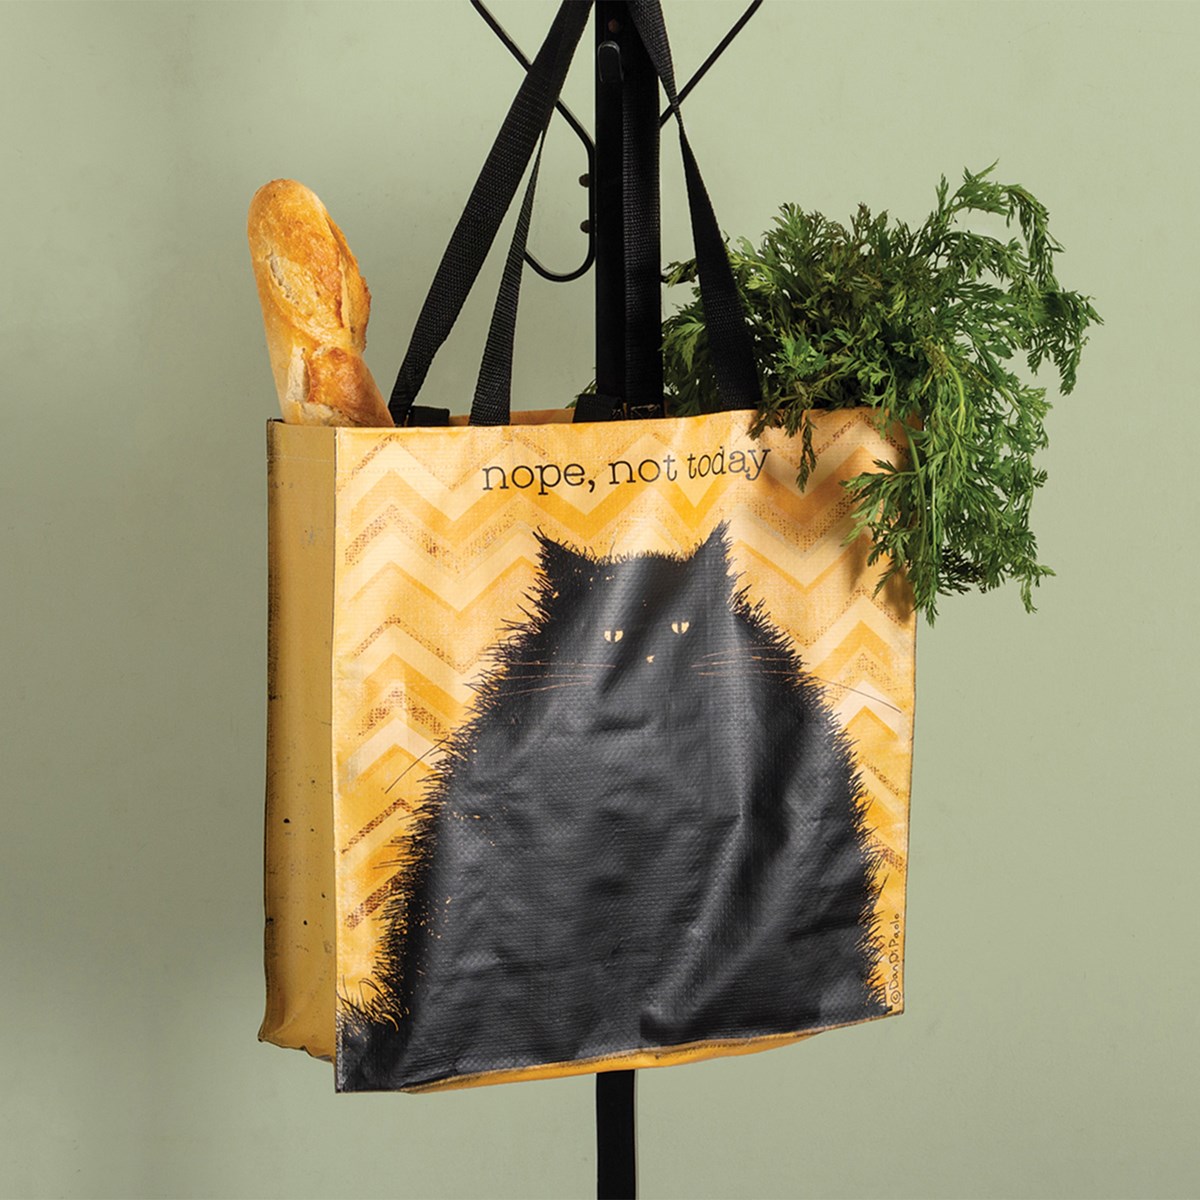 Nope Not Today Market Tote - Post-Consumer Material, Nylon